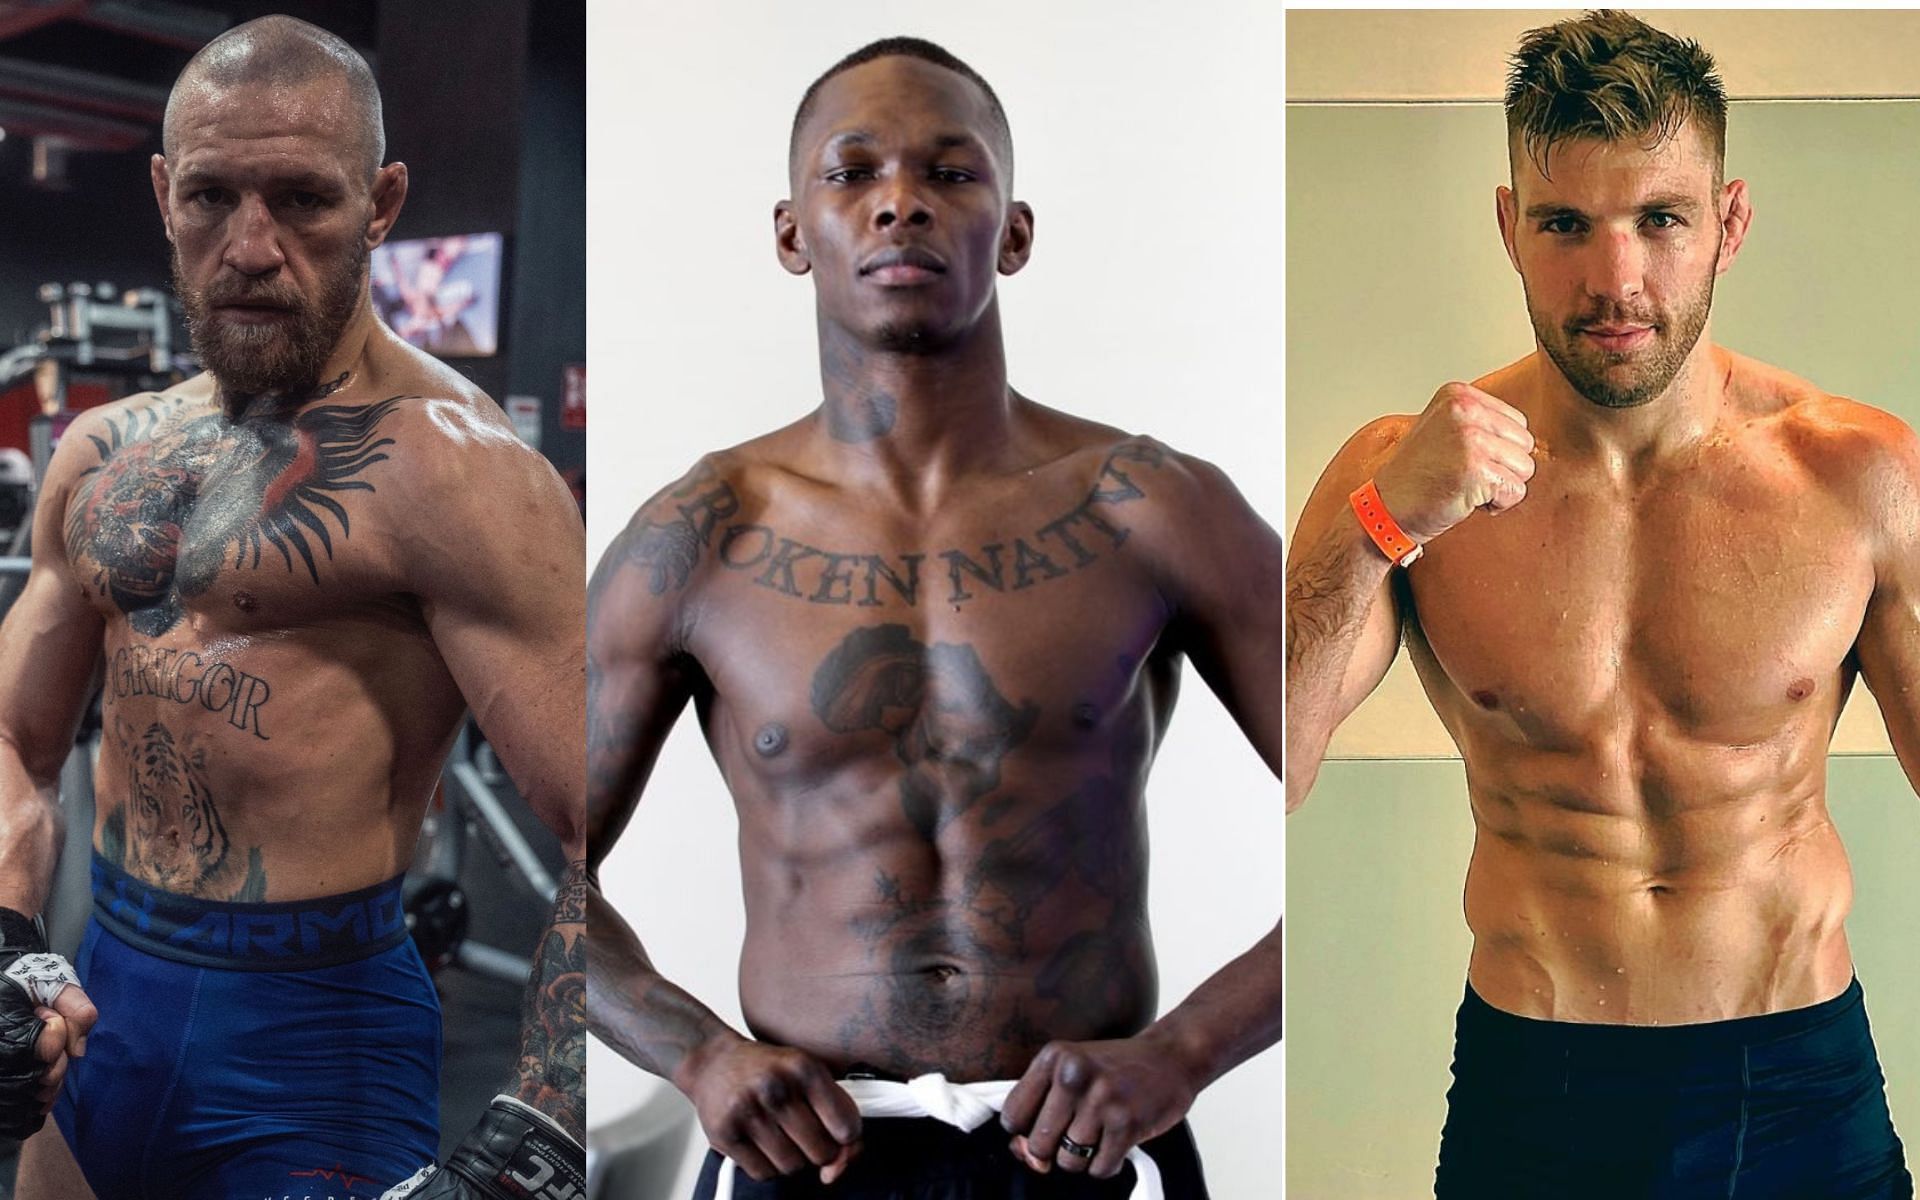 [Left to Right] Conor McGregor, Israel Adesanya, Dricus du Plessis [Images courtesy: @TheNotoriousMMA, @stylebender, @dricusduplessis Twitter]